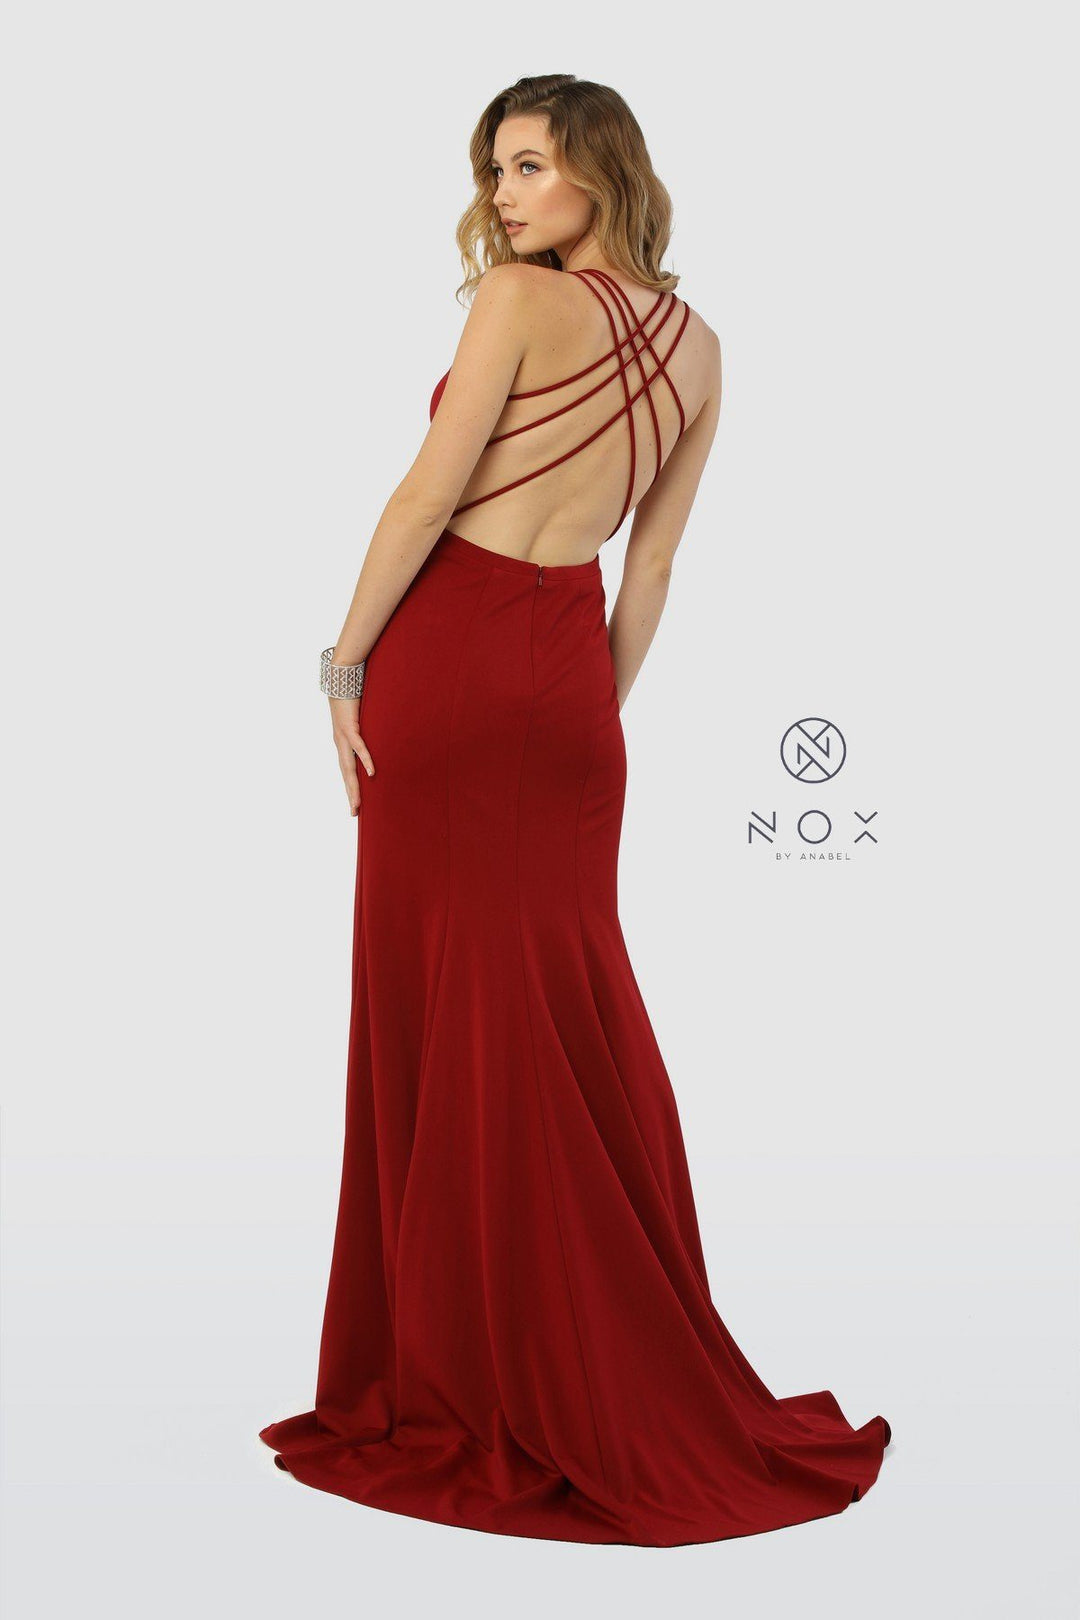 Long Front Lace-Up Dress with Leg Slit by Nox Anabel M133-Long Formal Dresses-ABC Fashion